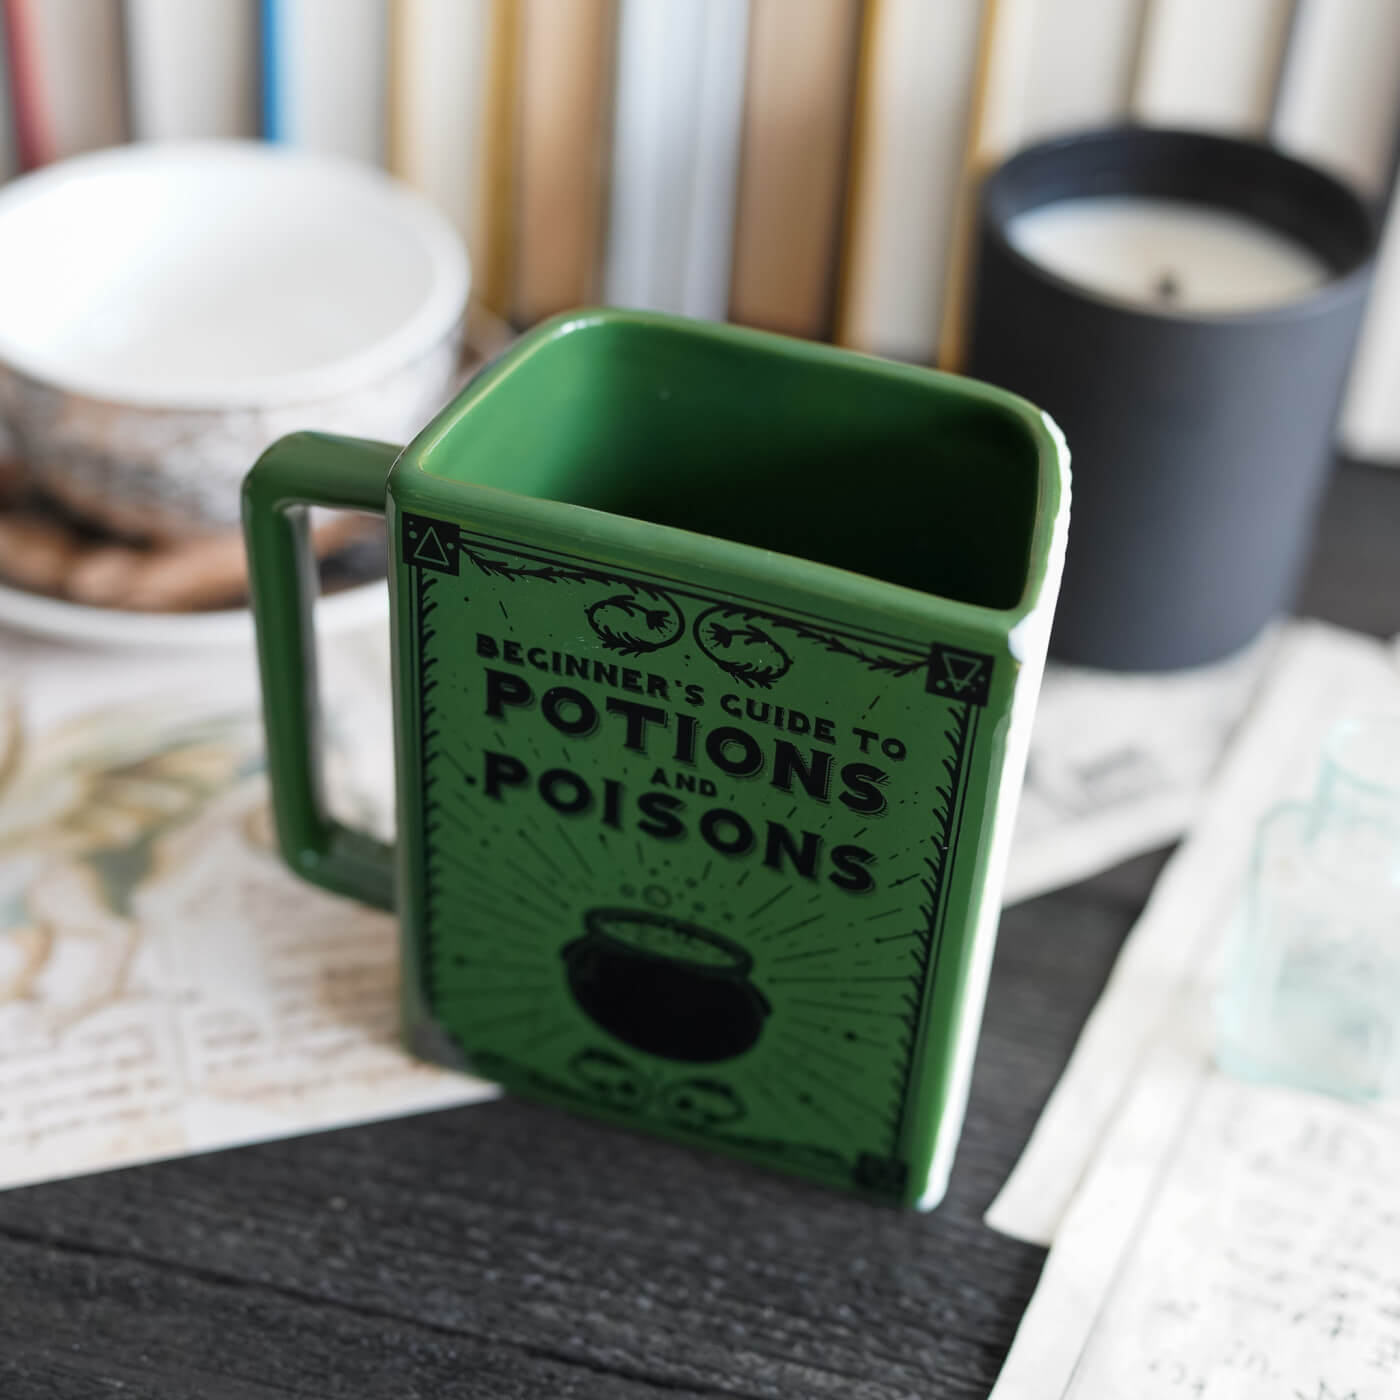 Potions and Poisons Book Mug sold by LitJoy a green mug that looks like a book with a handle